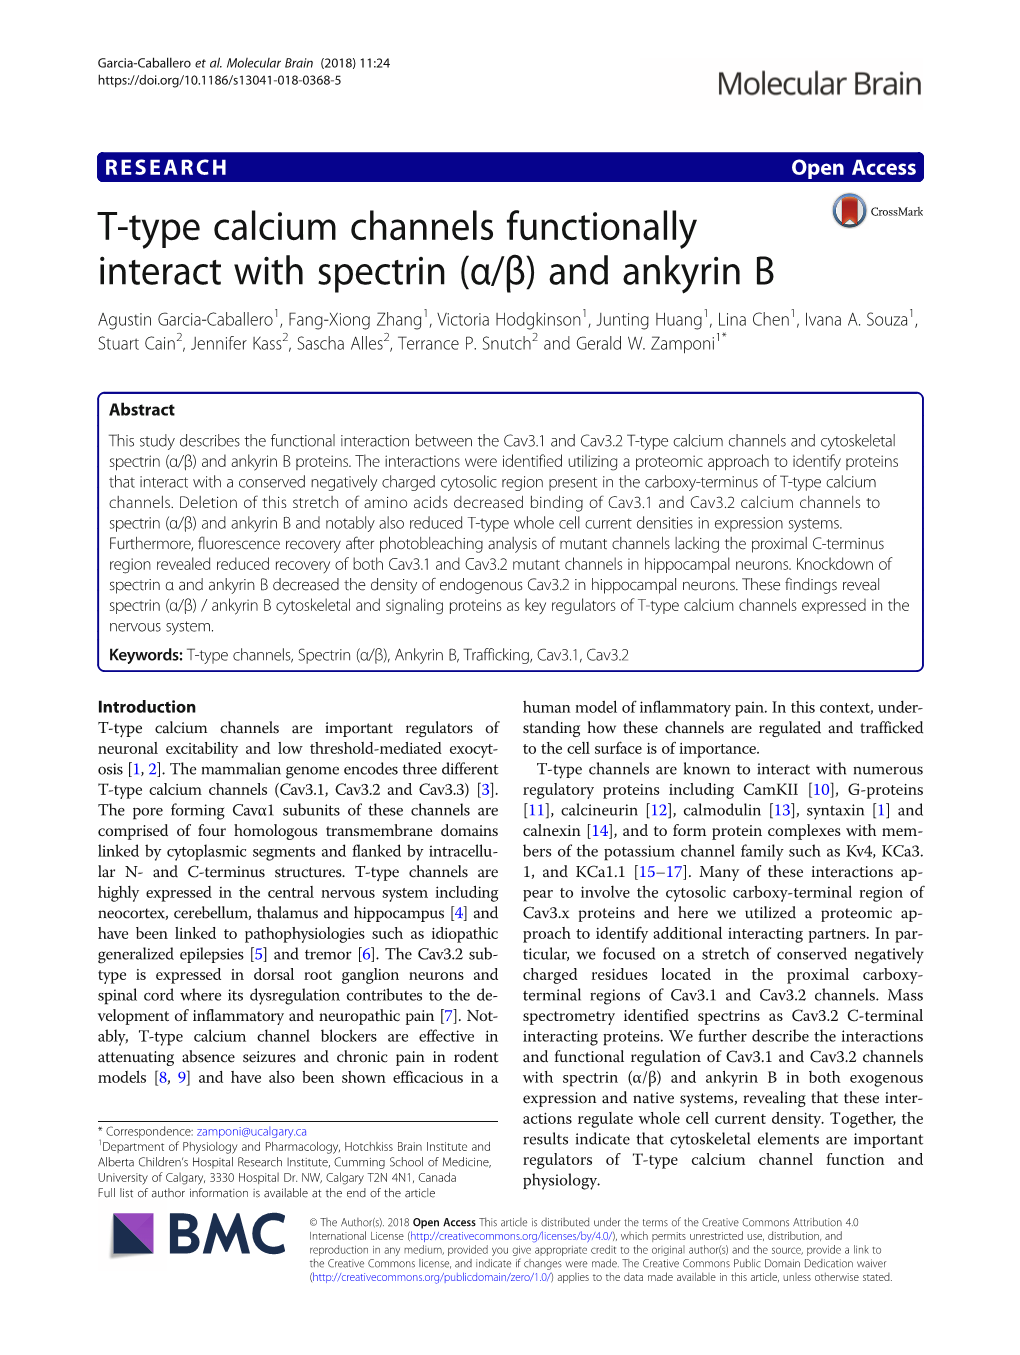 T-Type Calcium Channels Functionally Interact with Spectrin (Α/Β)